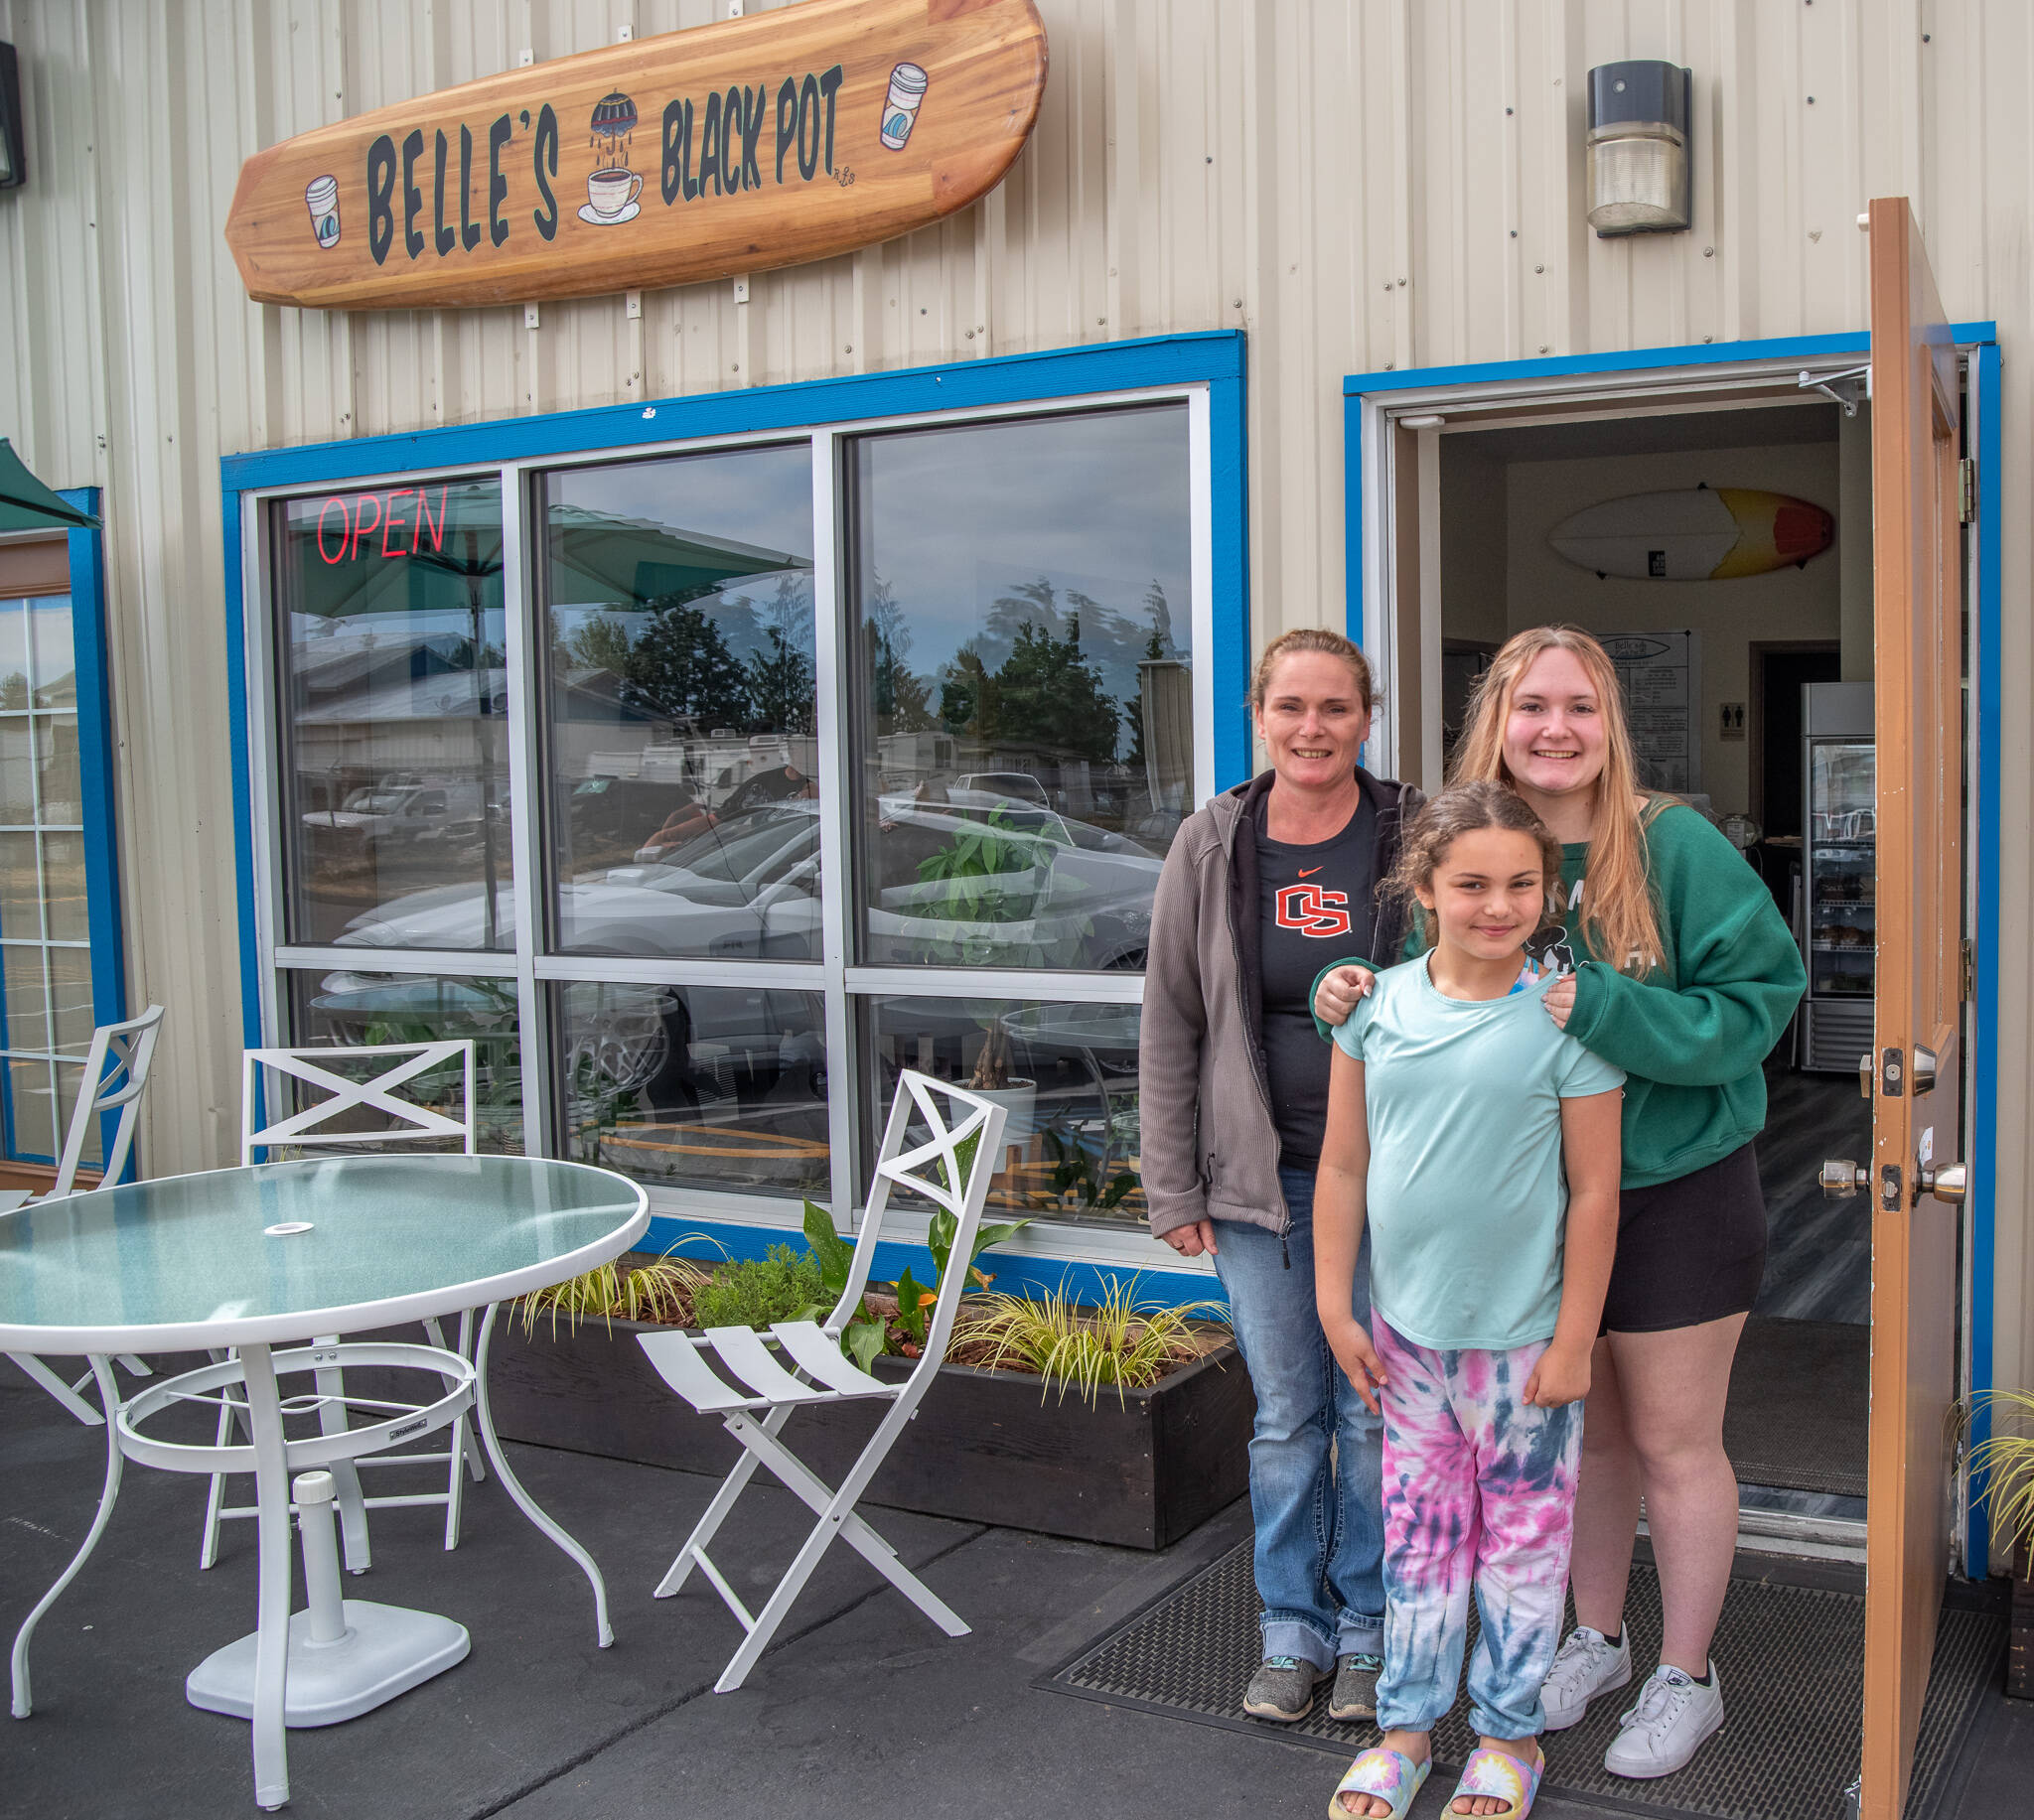 Sequim Gazette photo by Emily Matthiessen
Heather, Olivia and Samantha Owen stand outside Belle’s Black Pot at 131 River Road in Sequim. The beach-themed coffeehouse and deli specializes in old favorites and new flavor combinations, both in drinks and food.